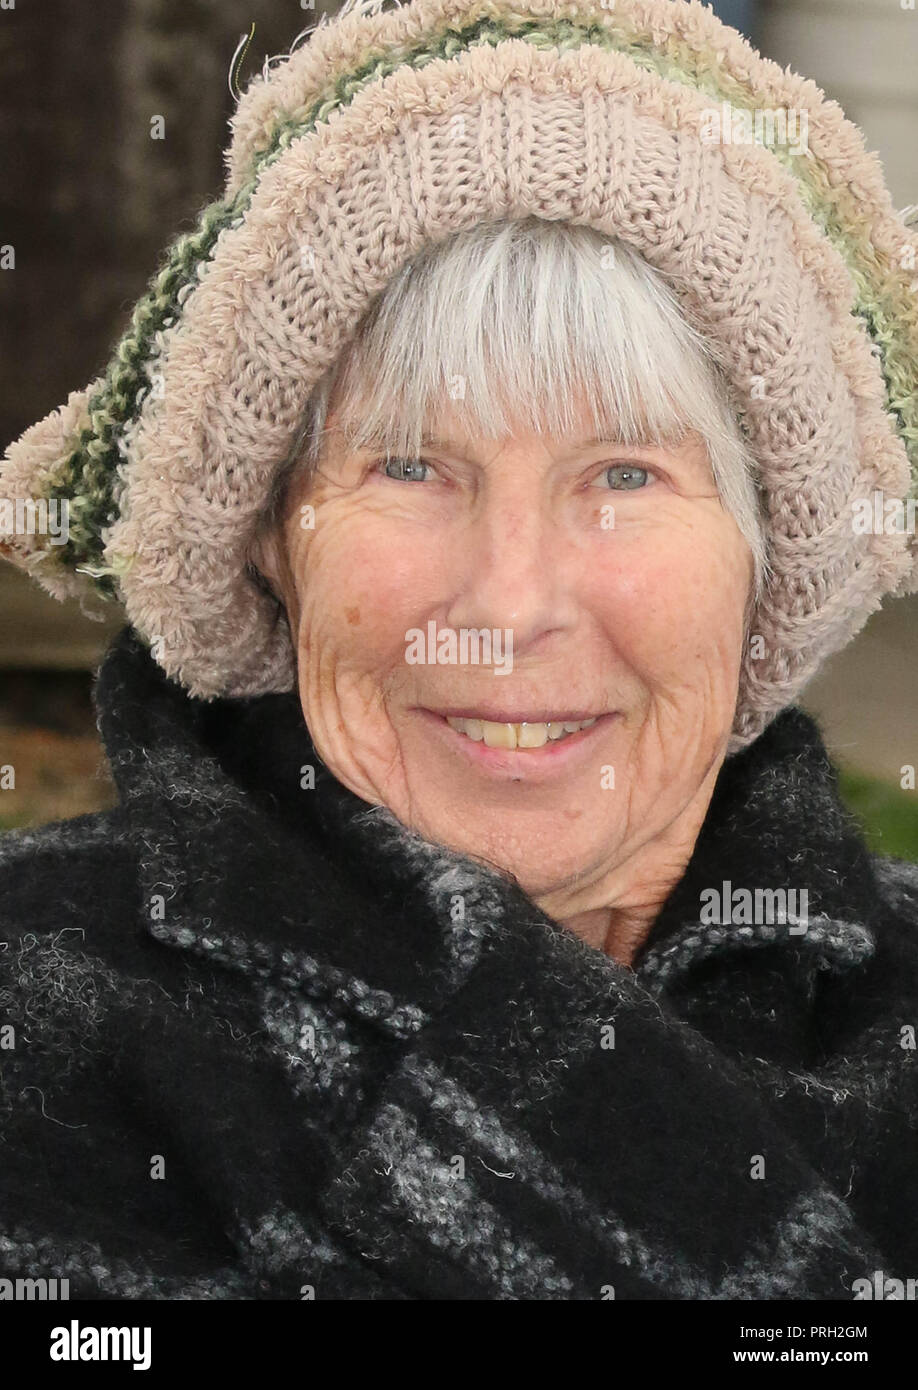 Retired lady enjoying sitting outside with winter coat and woolly hat on. Stock Photo